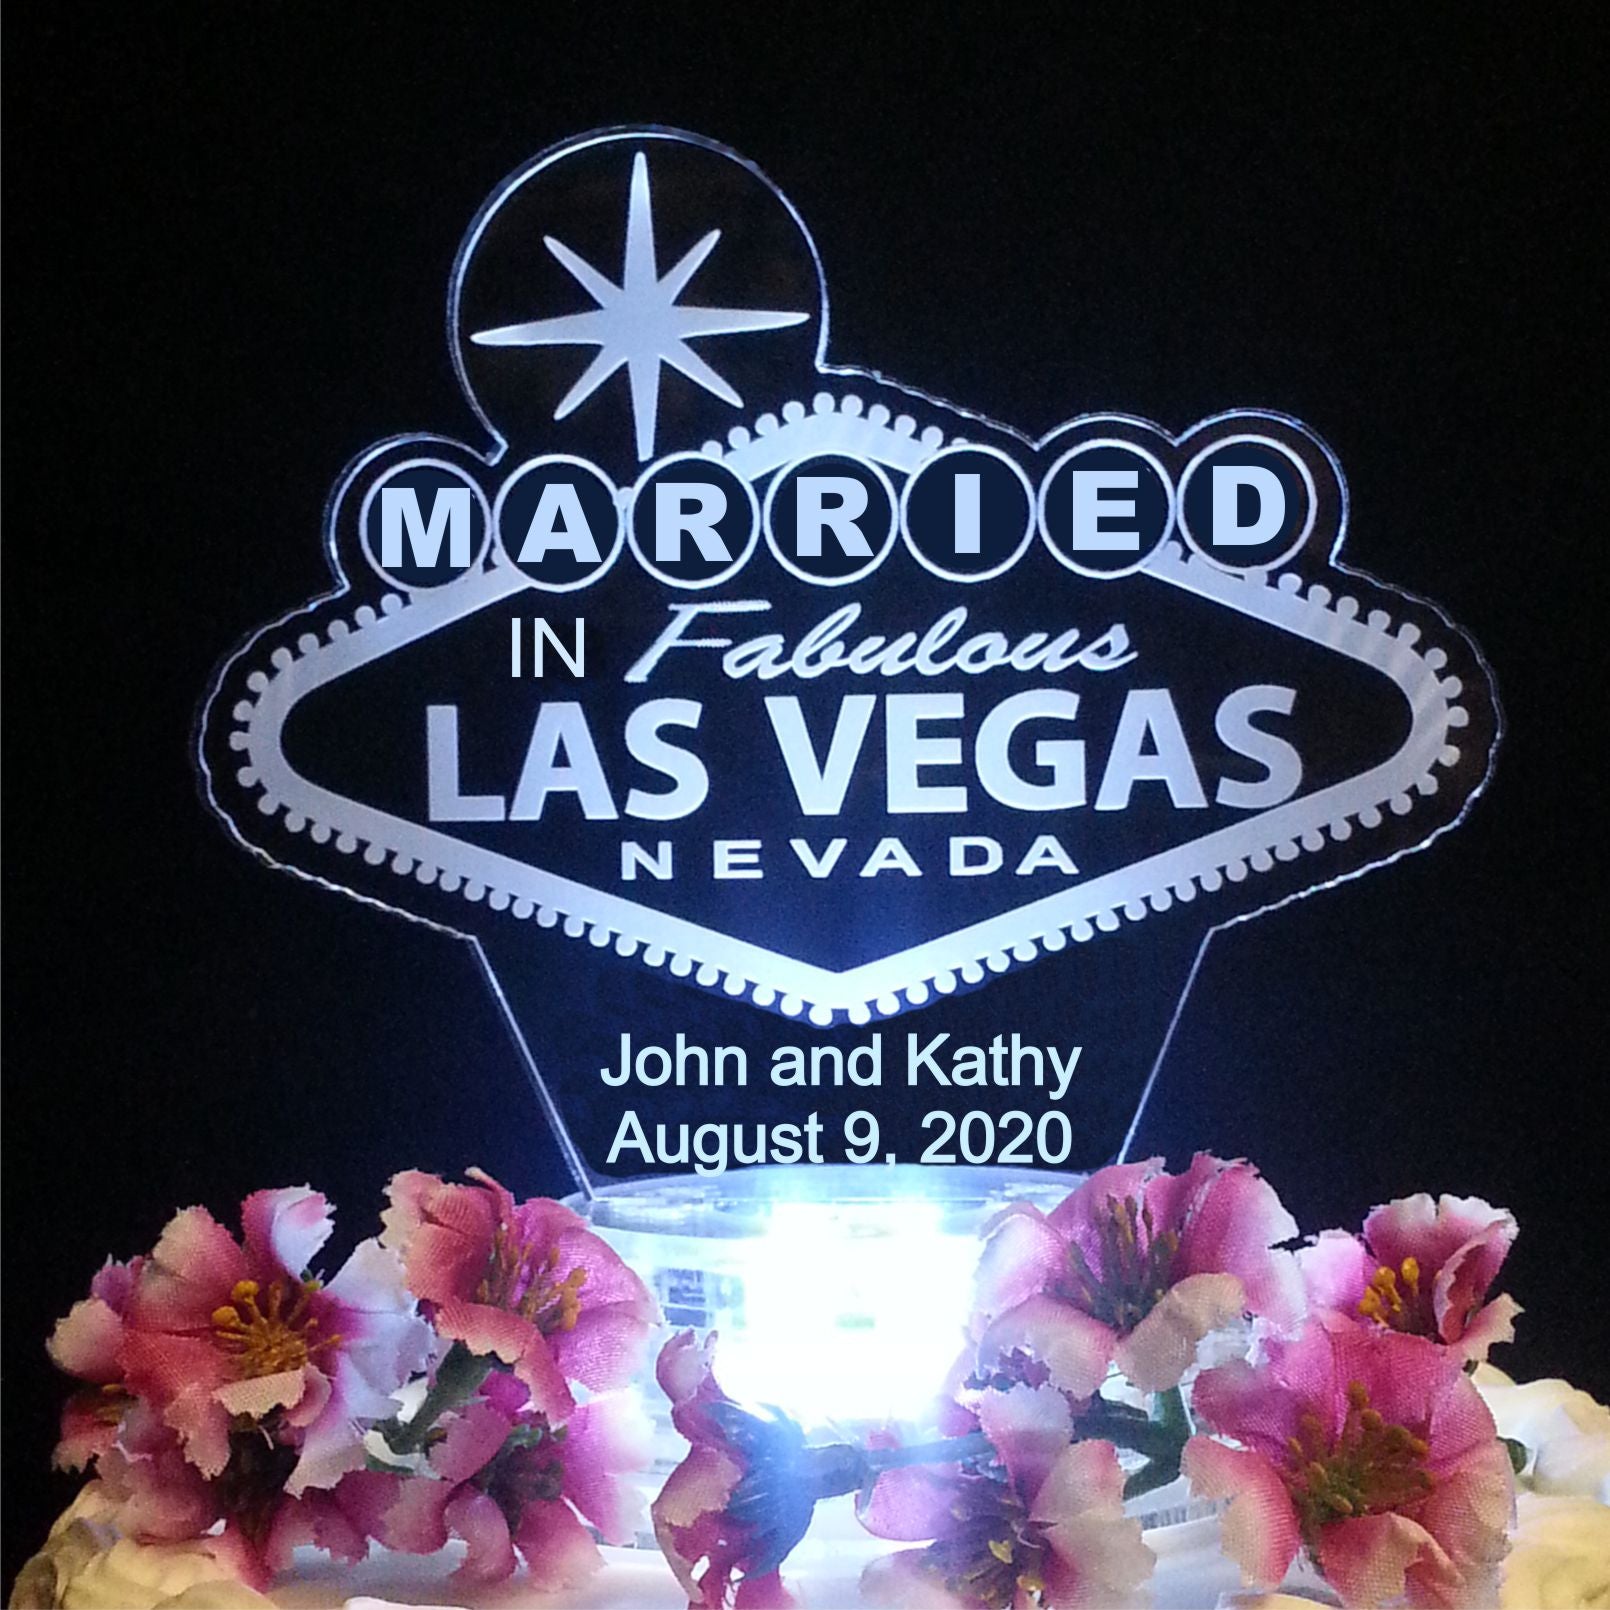 Married in Las Vegas lighted cake topper along with names and date